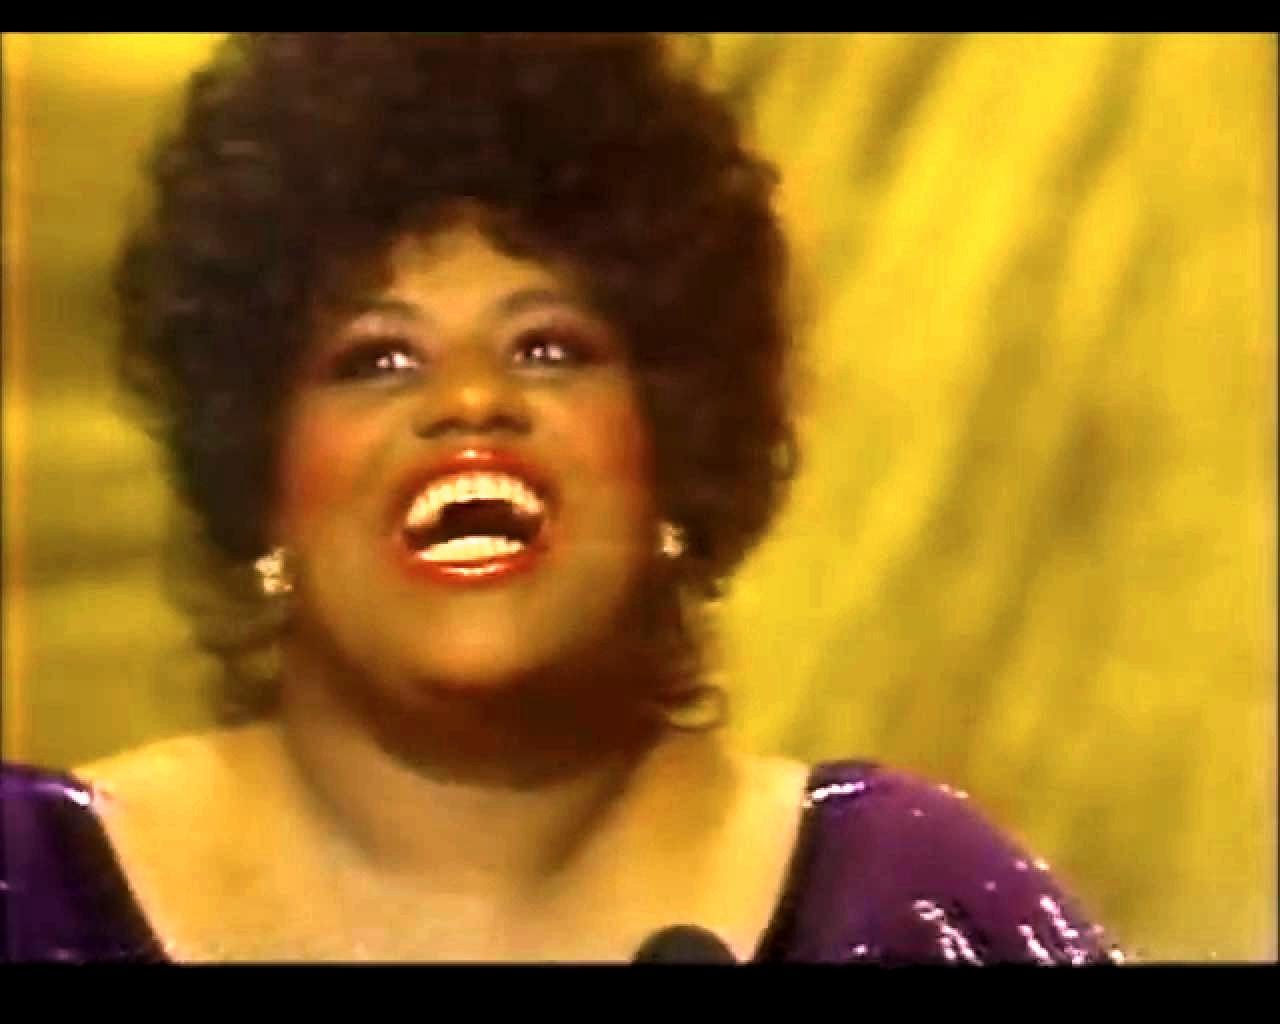 Jennifer Holliday accepting her Tony for "Dreamgirls" in 1982.